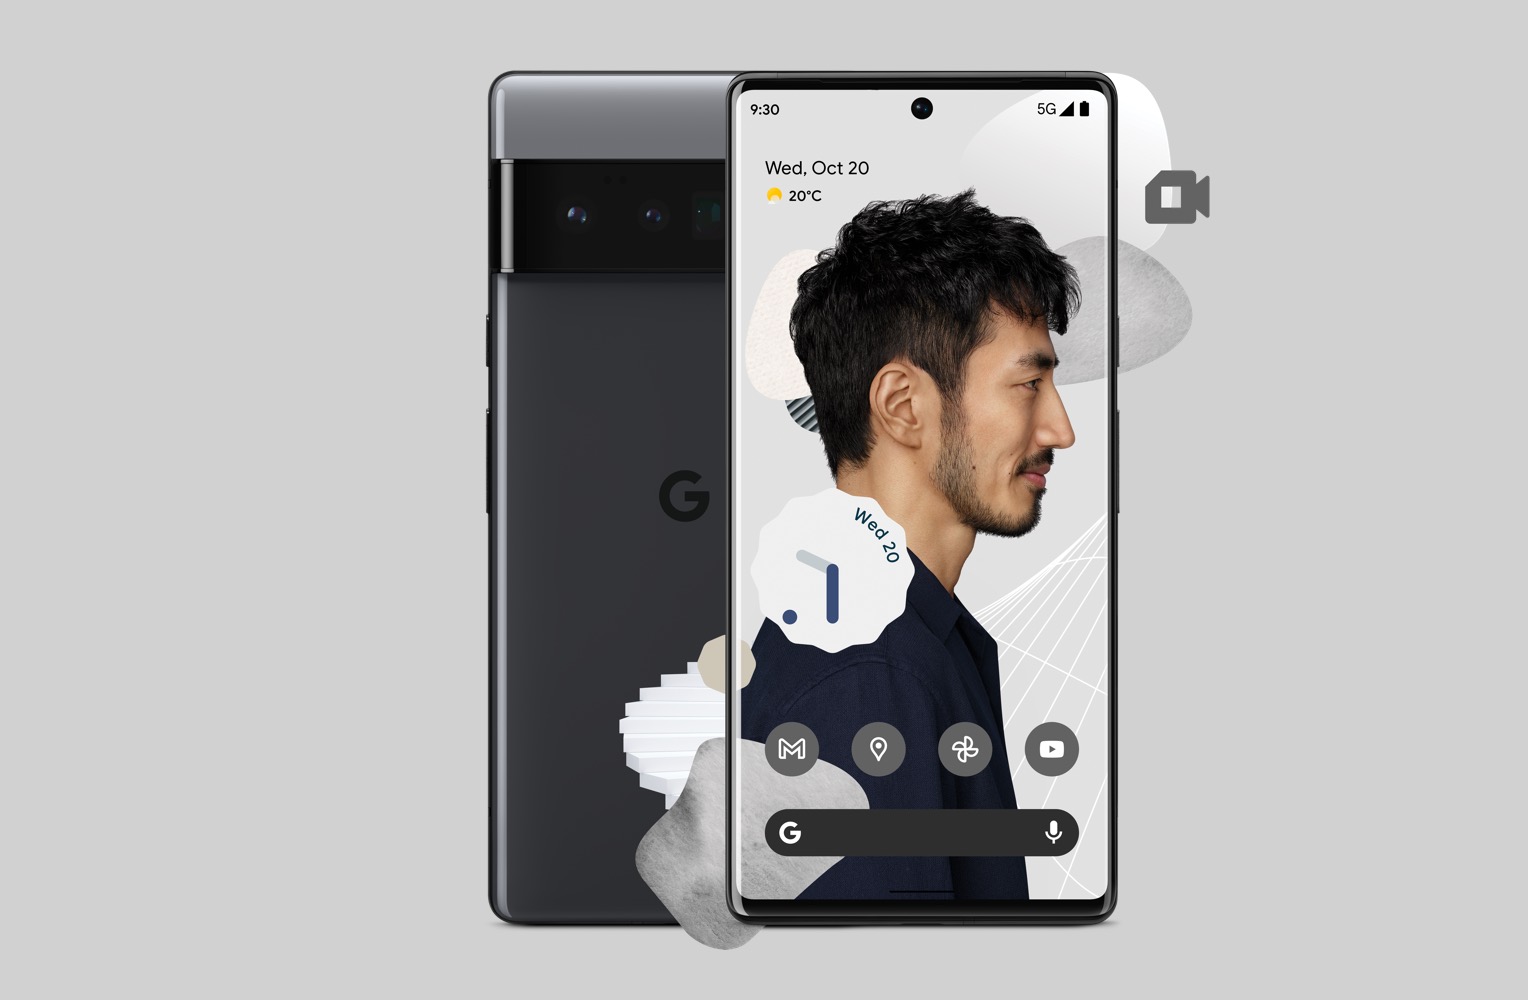 Google Pixel 6 Pro front and back view.